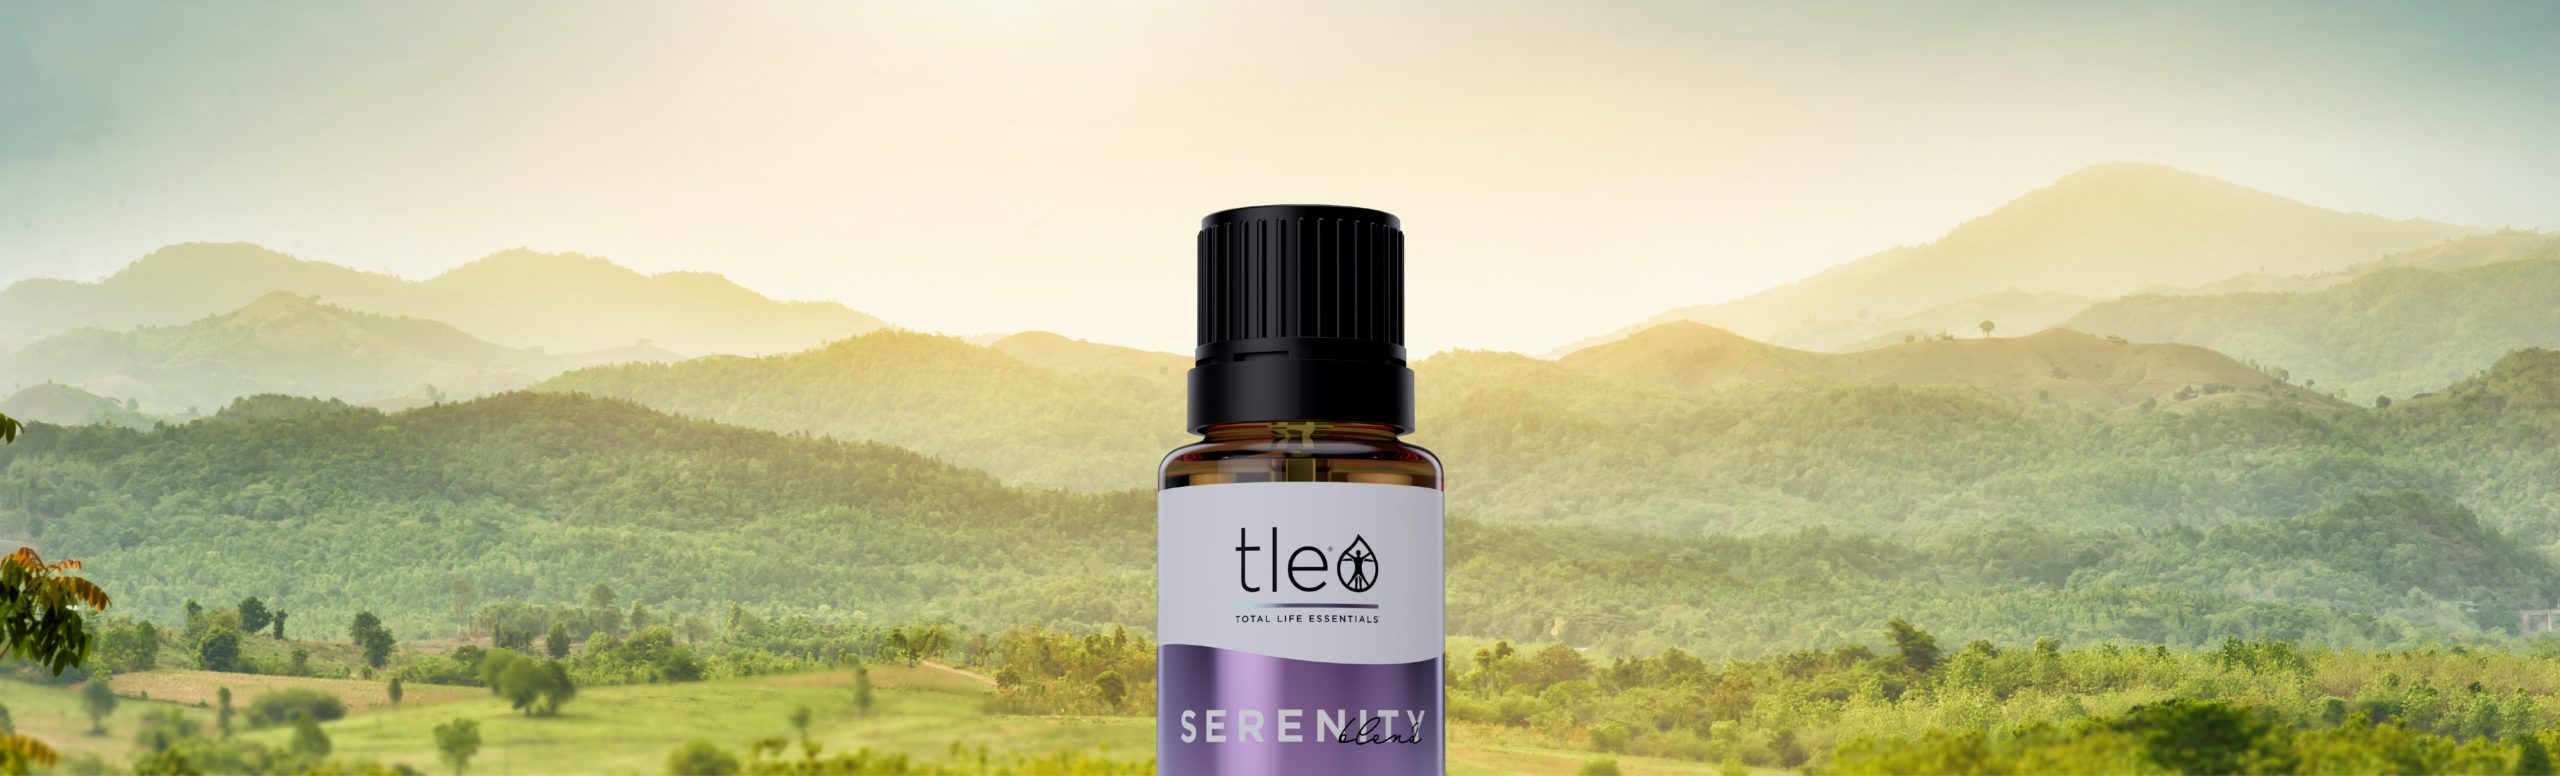 TLEO Serenity Blend Offers Peace, Calm, and Balance of Mind, Body, & Spirit